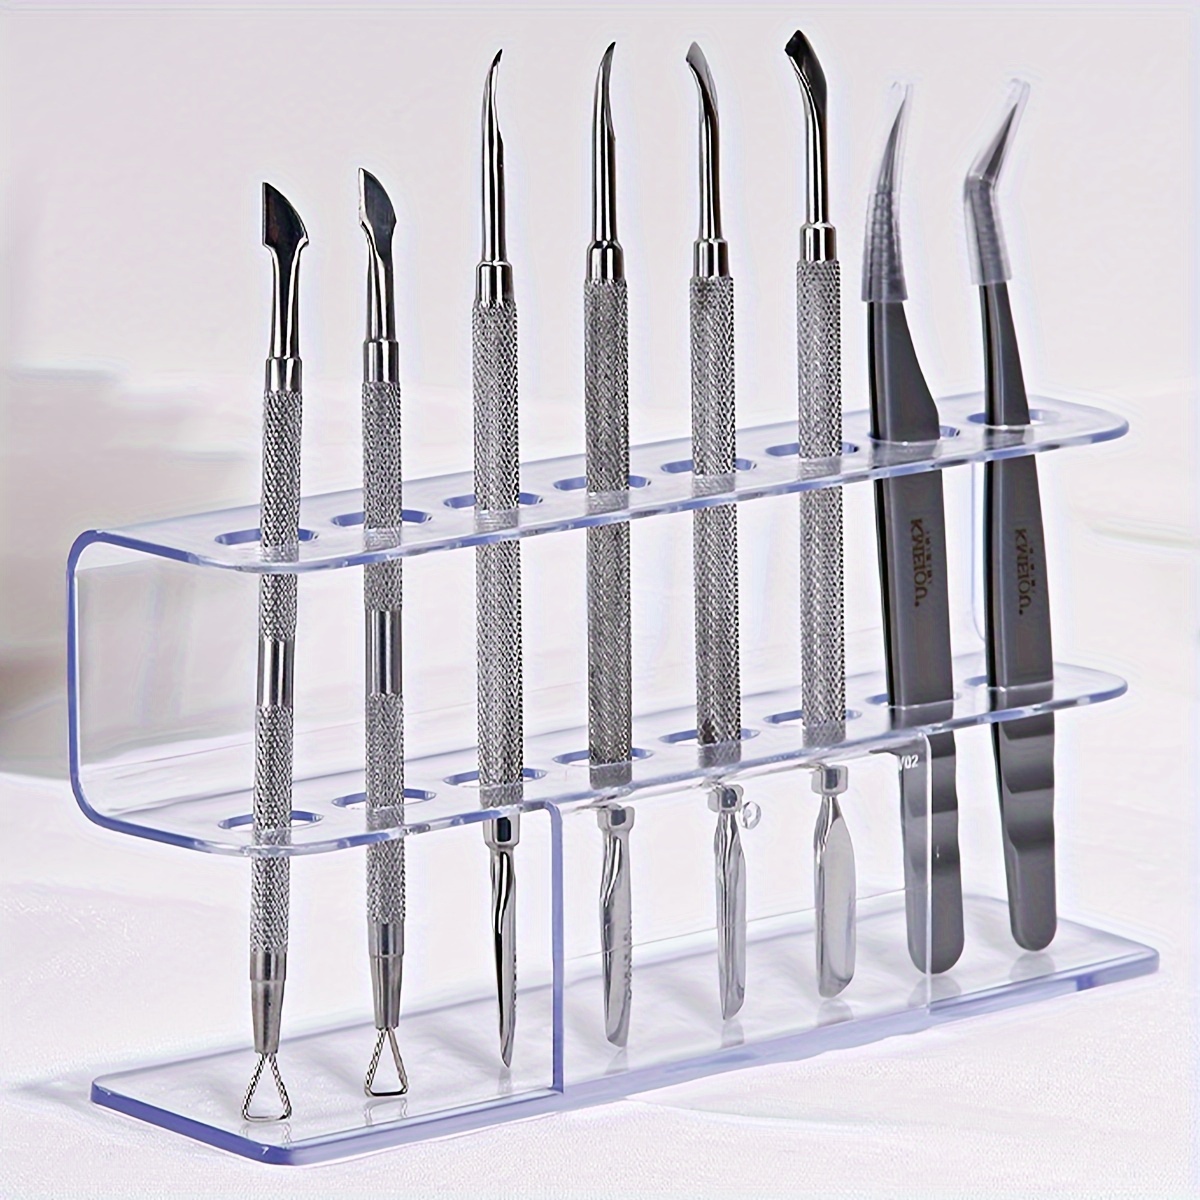 

Professional Acrylic Tweezers Organizer Stand, Transparent Multi-slot Tools Holder, Unscented, Durable Lab Instrument Rack For Precision Work